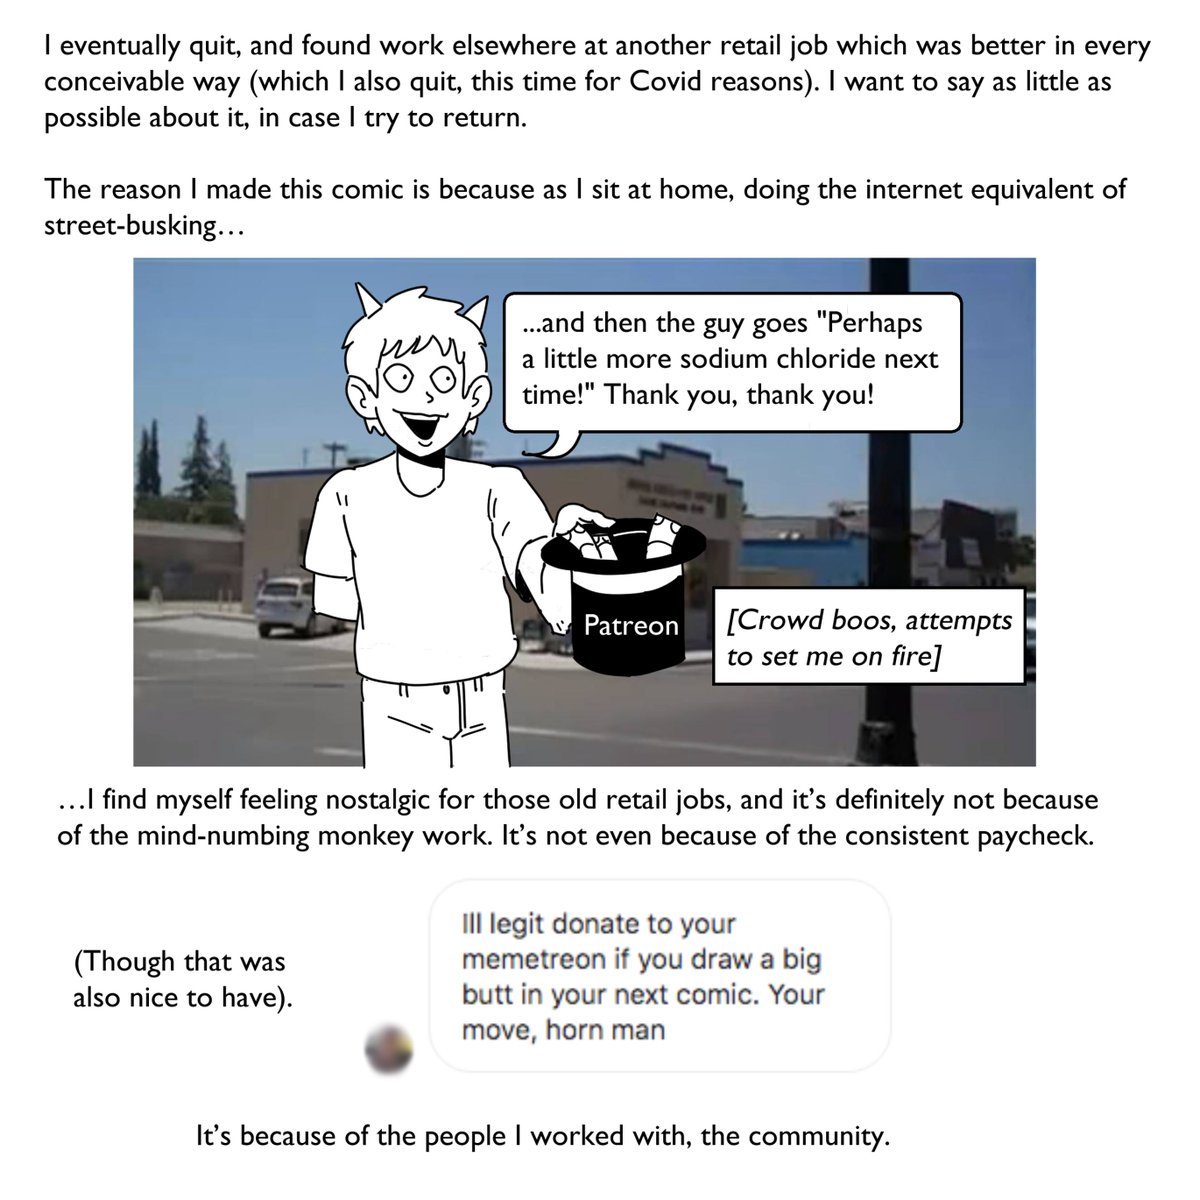 A Comic About Work and Identity [3/4]